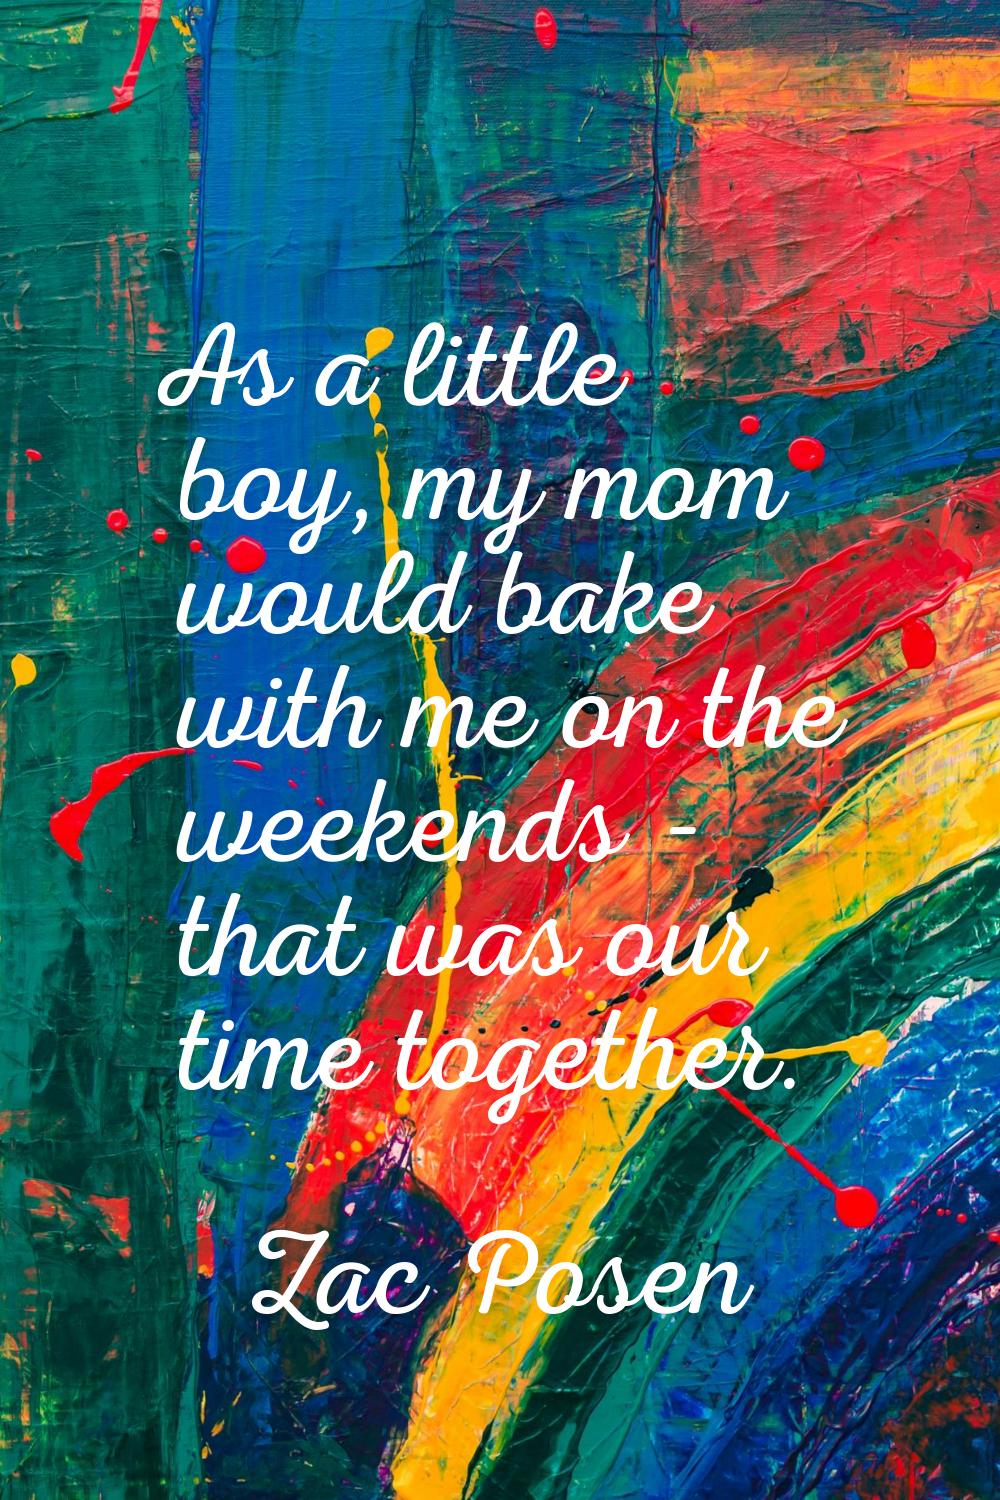 As a little boy, my mom would bake with me on the weekends - that was our time together.